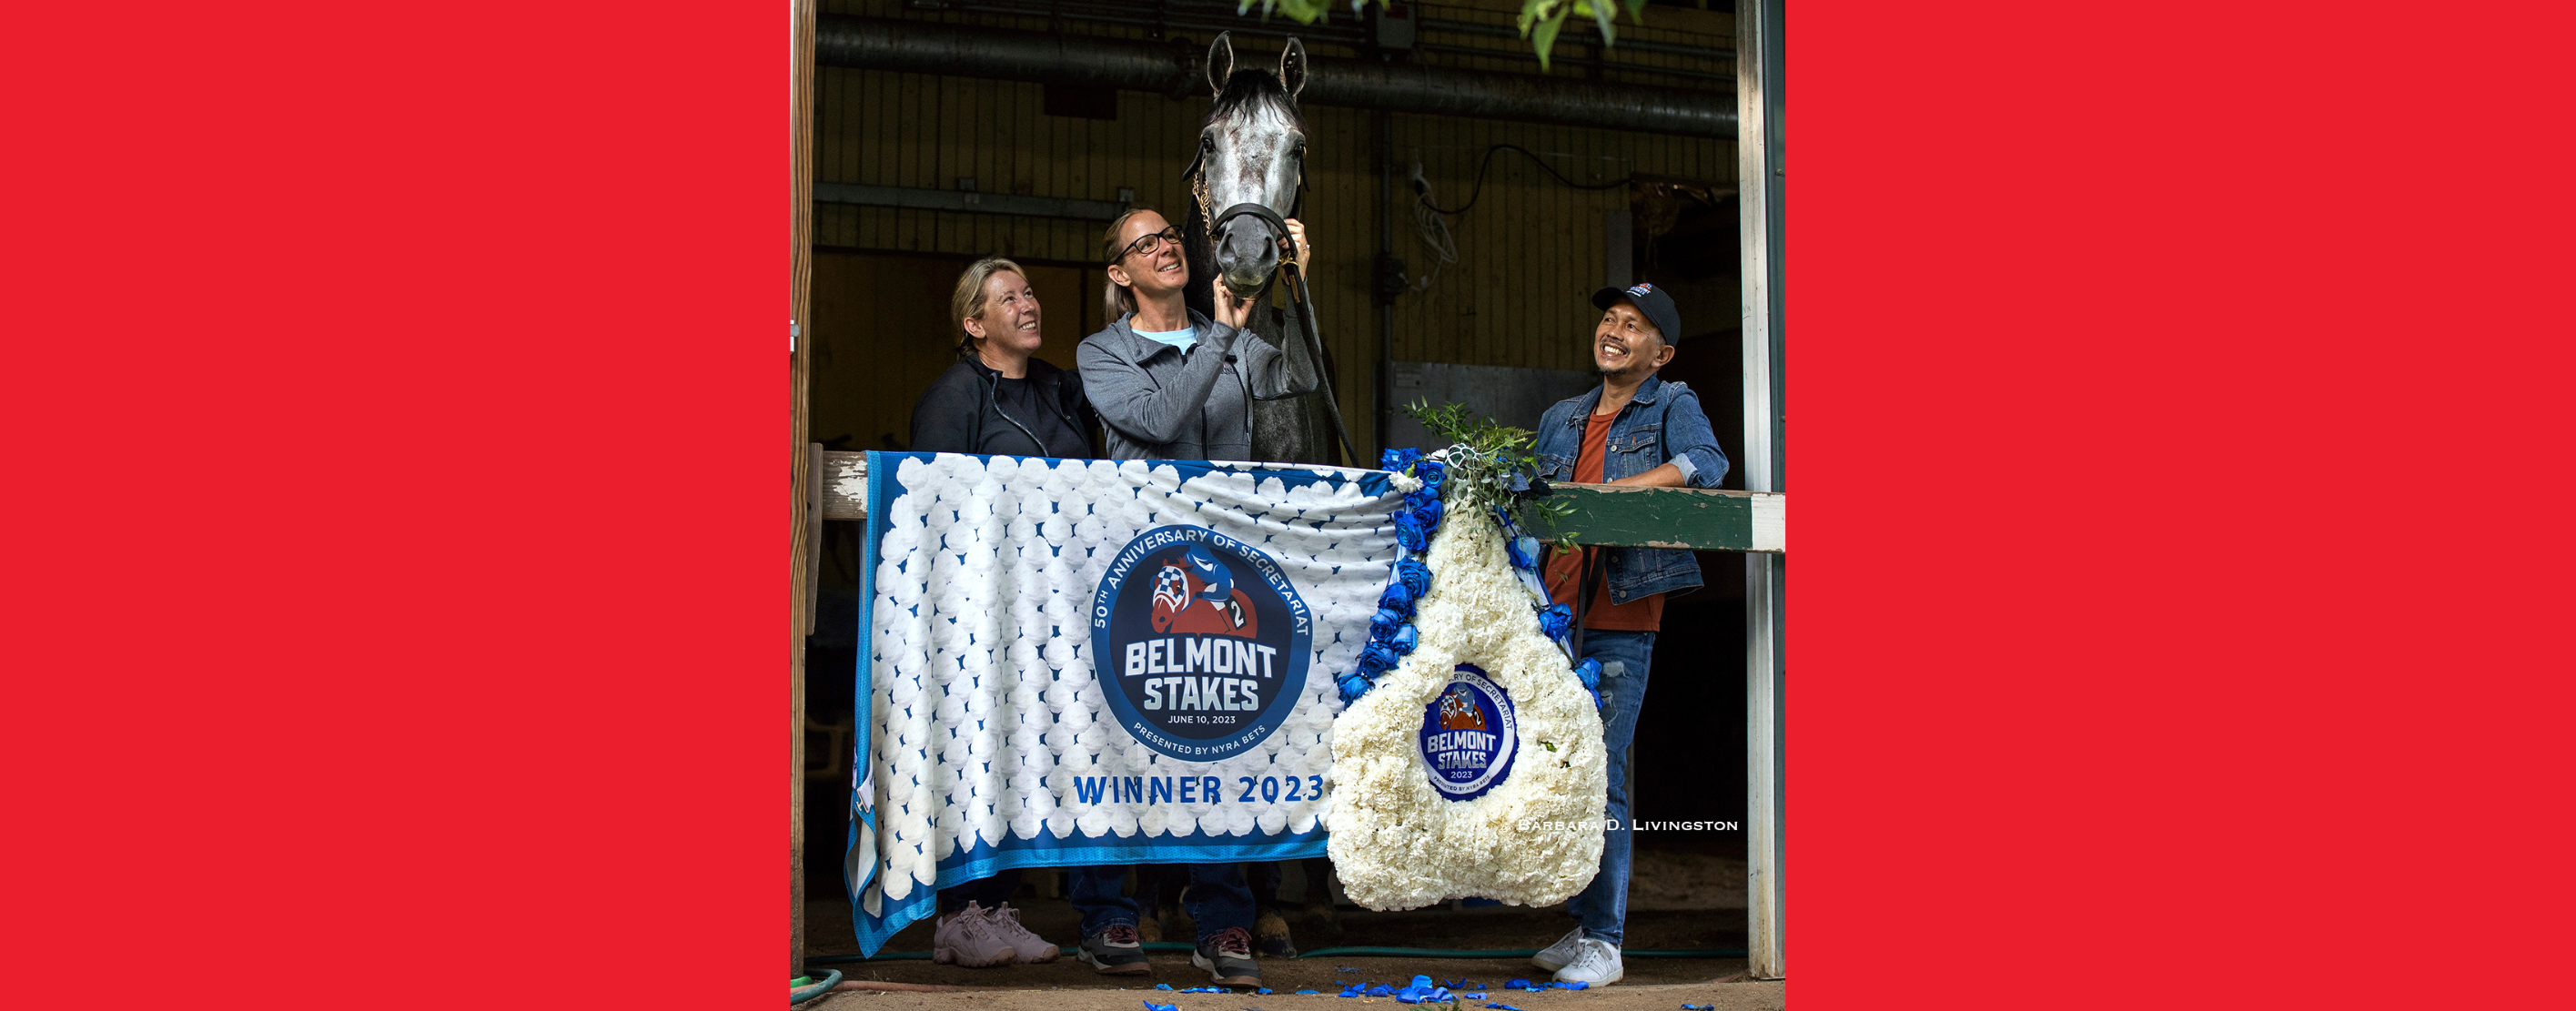 Horse Jena Antonucci stands behind a winner's banner with her horse, Arcangelo